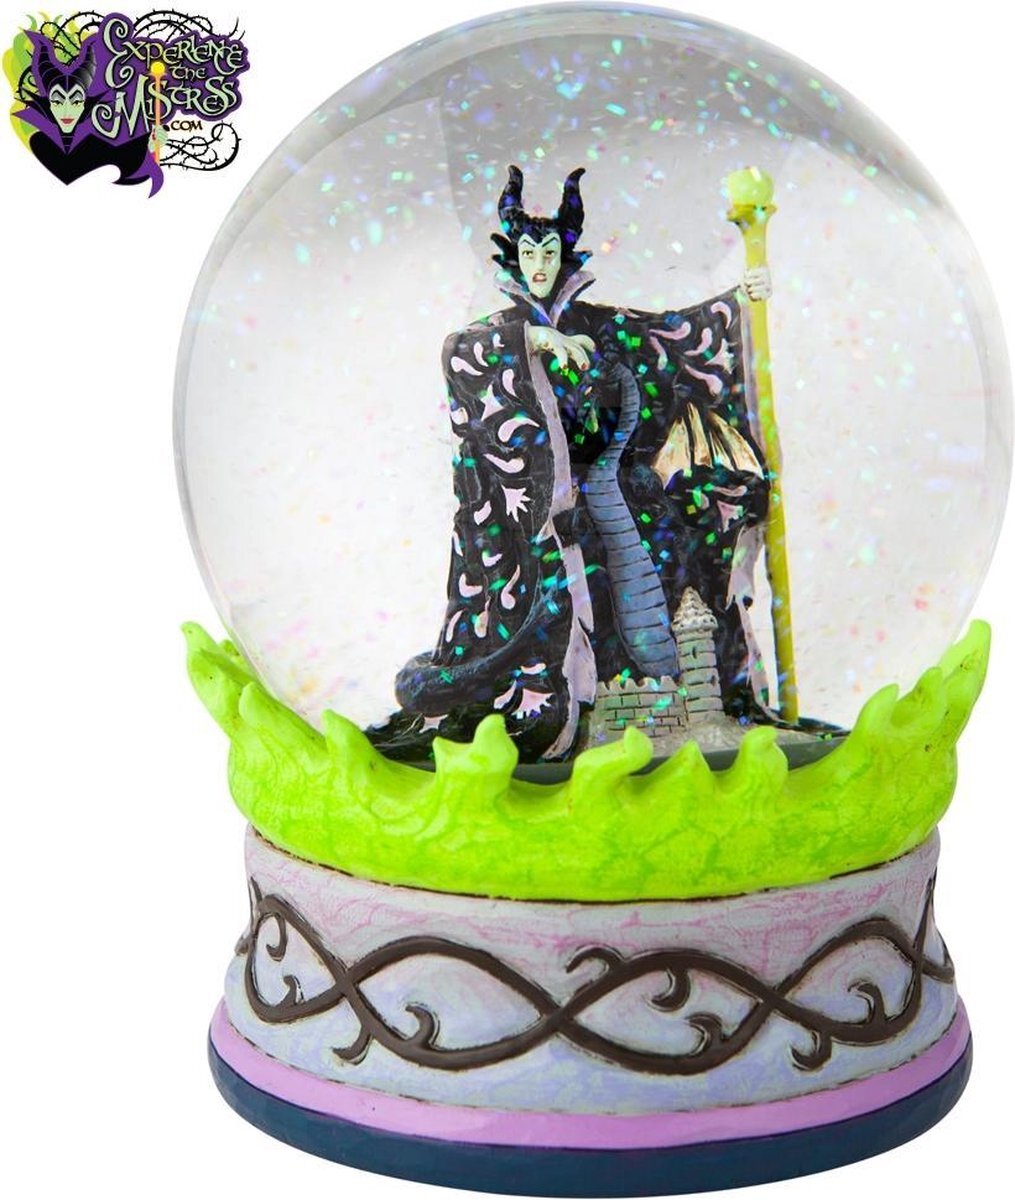 Disney Traditions (Jim Shore) Disney Traditions Maleficent Waterball